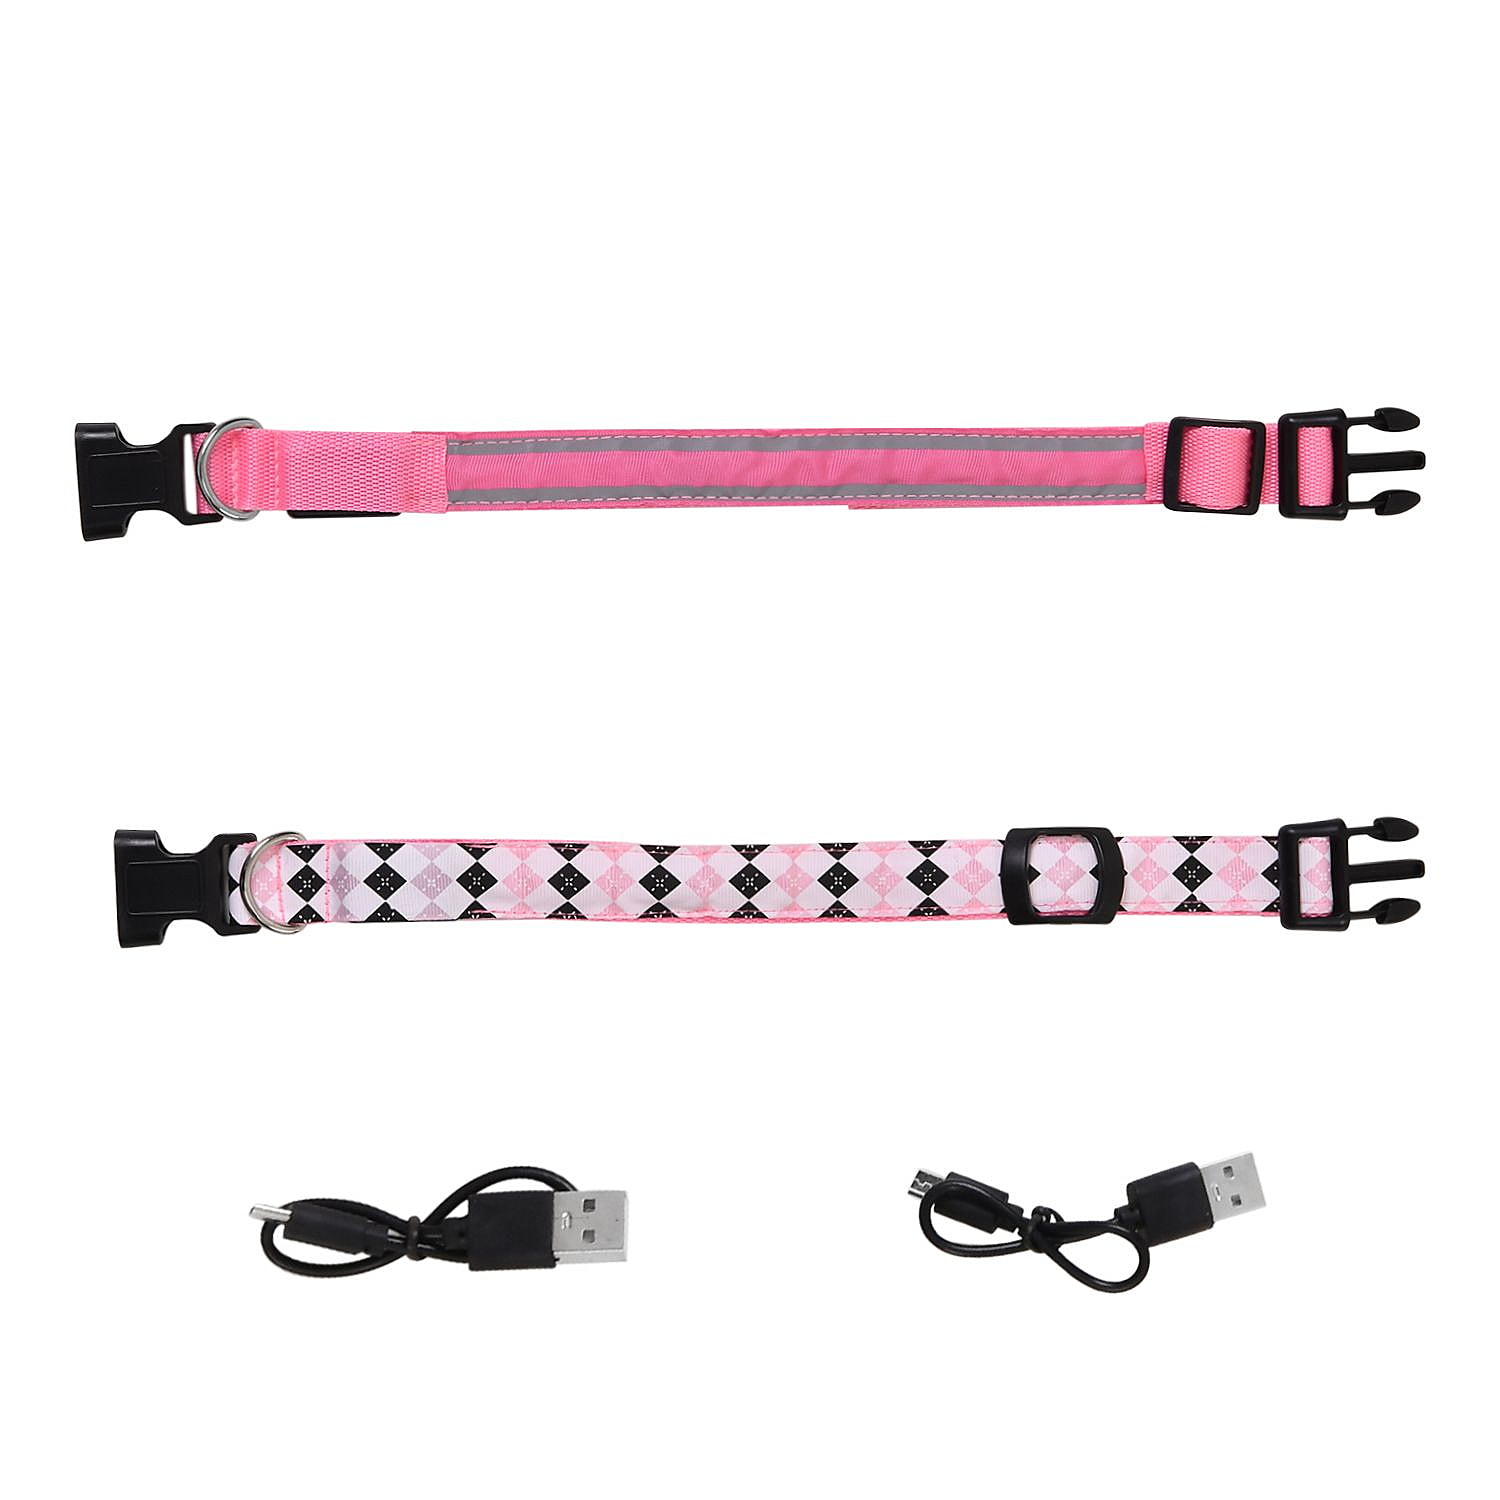 Rechargeable Set of 2 Adjustable LED Lighted Dog Collar with Clip Closure (Size L) - Pink